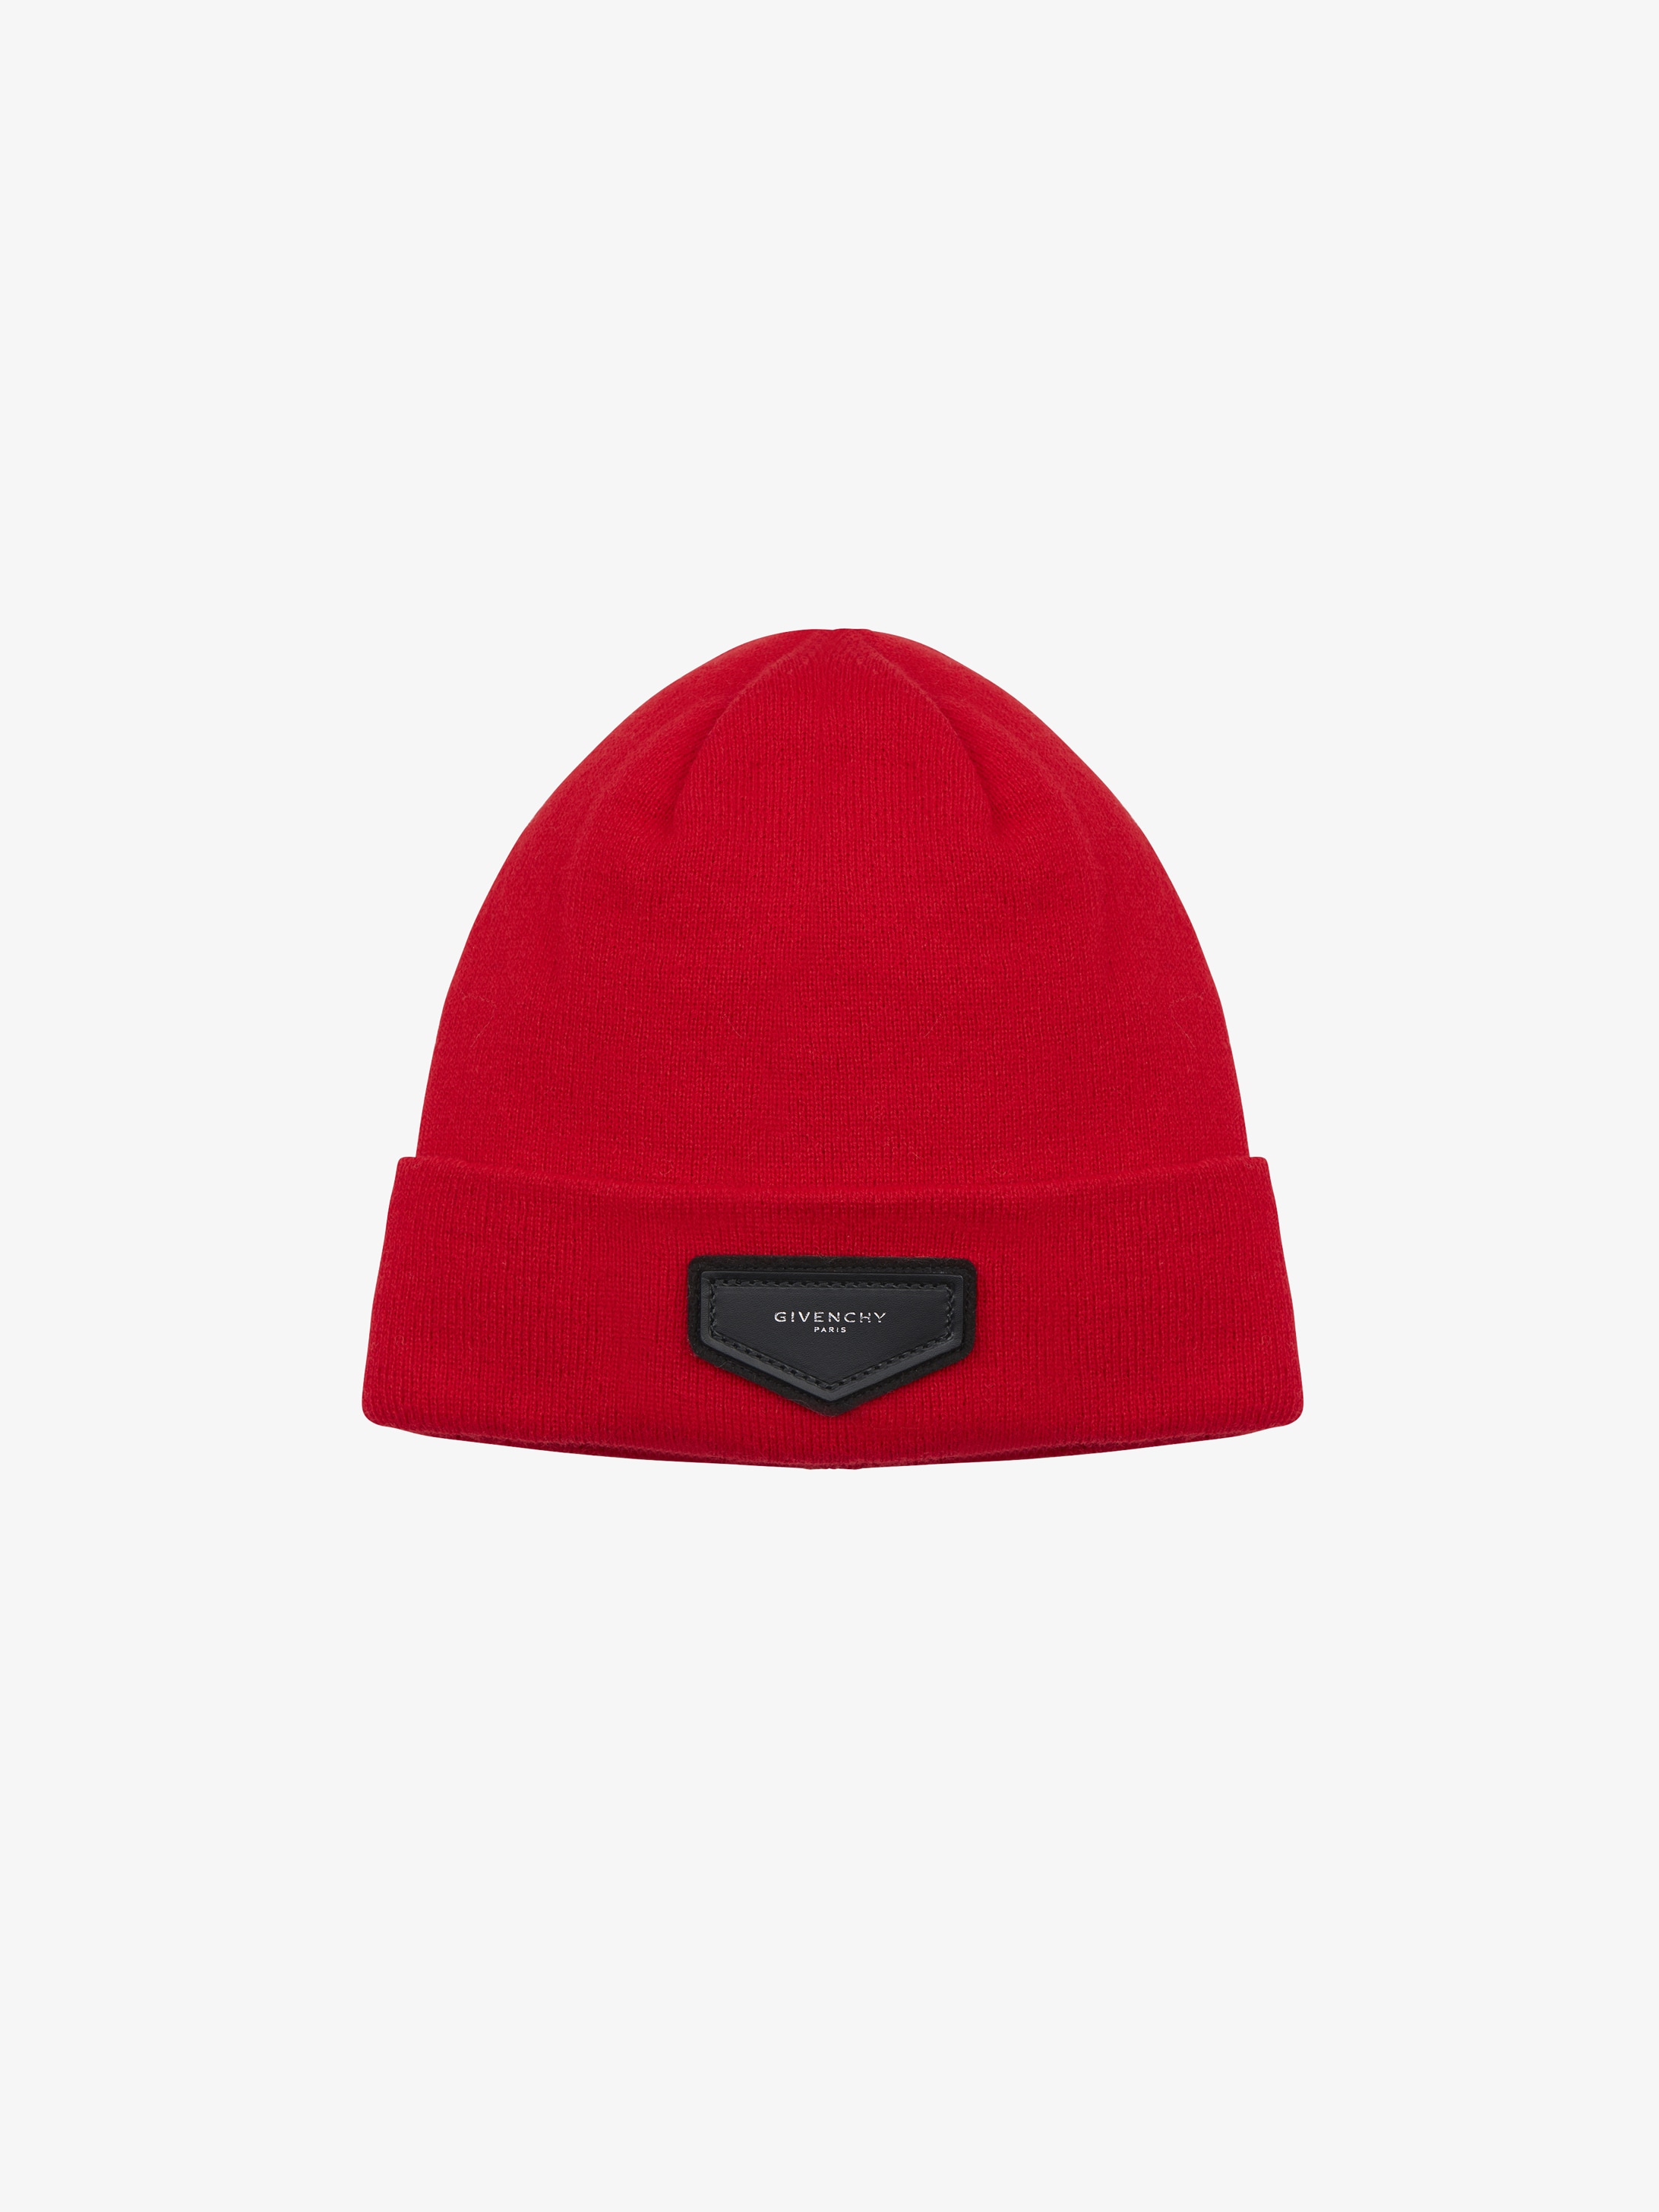 Givenchy patch hat | GIVENCHY Paris